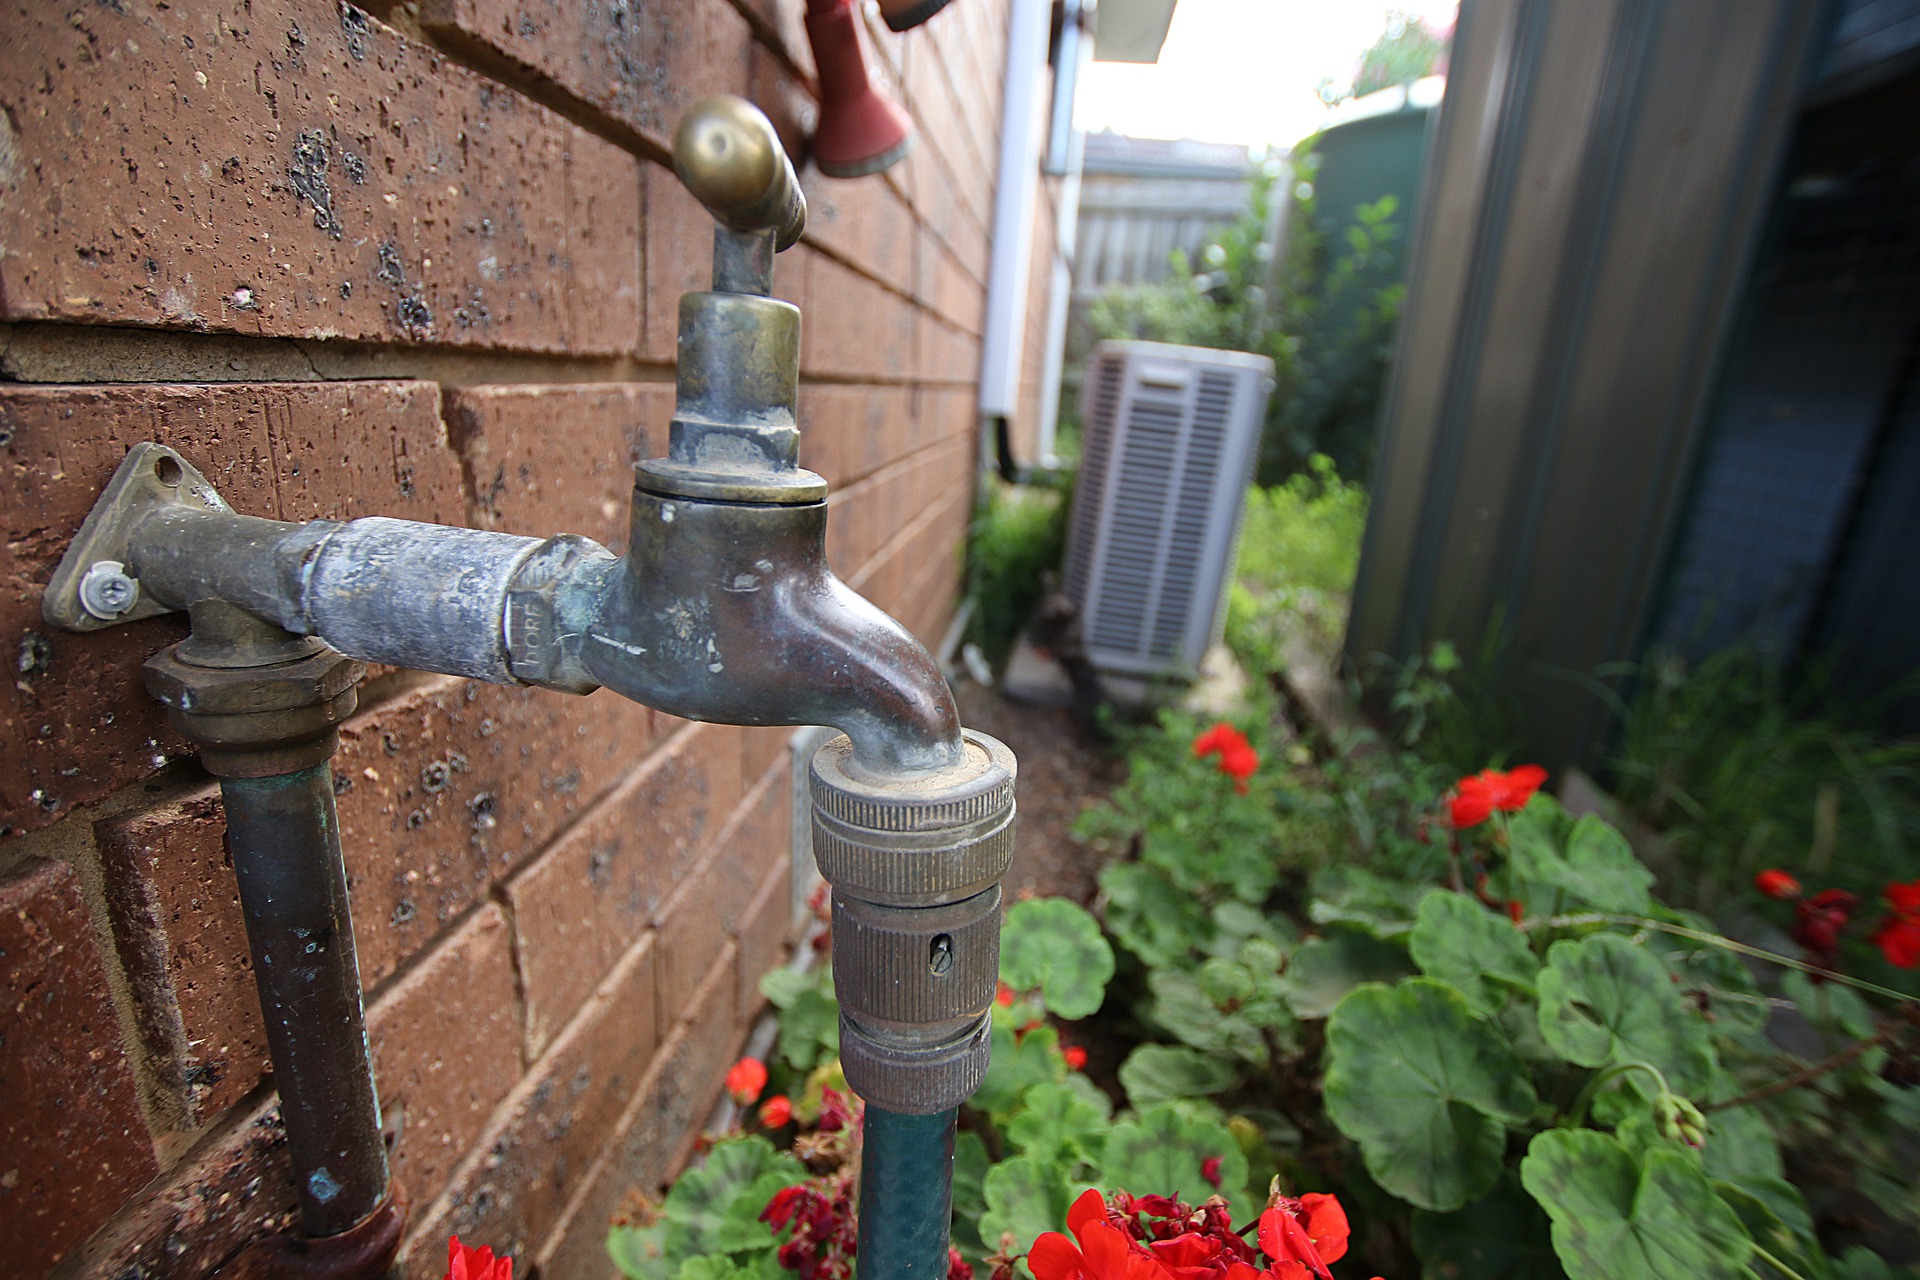 Could there be Legionella risk in your garden?